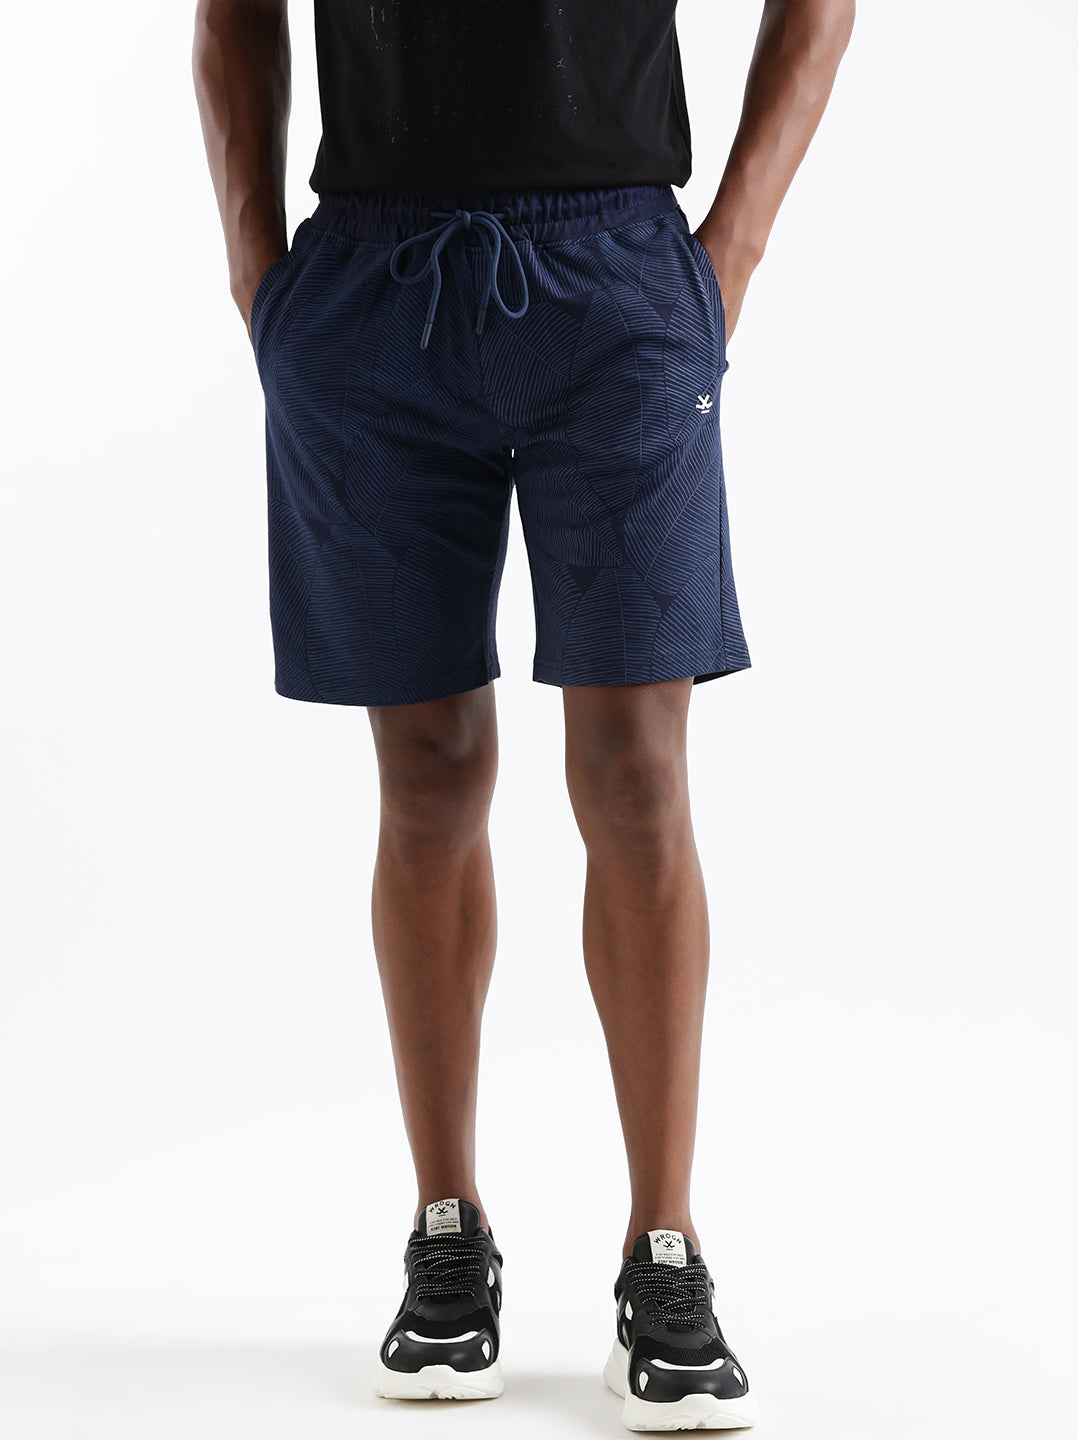 AOP Leafy Lines Printed Shorts